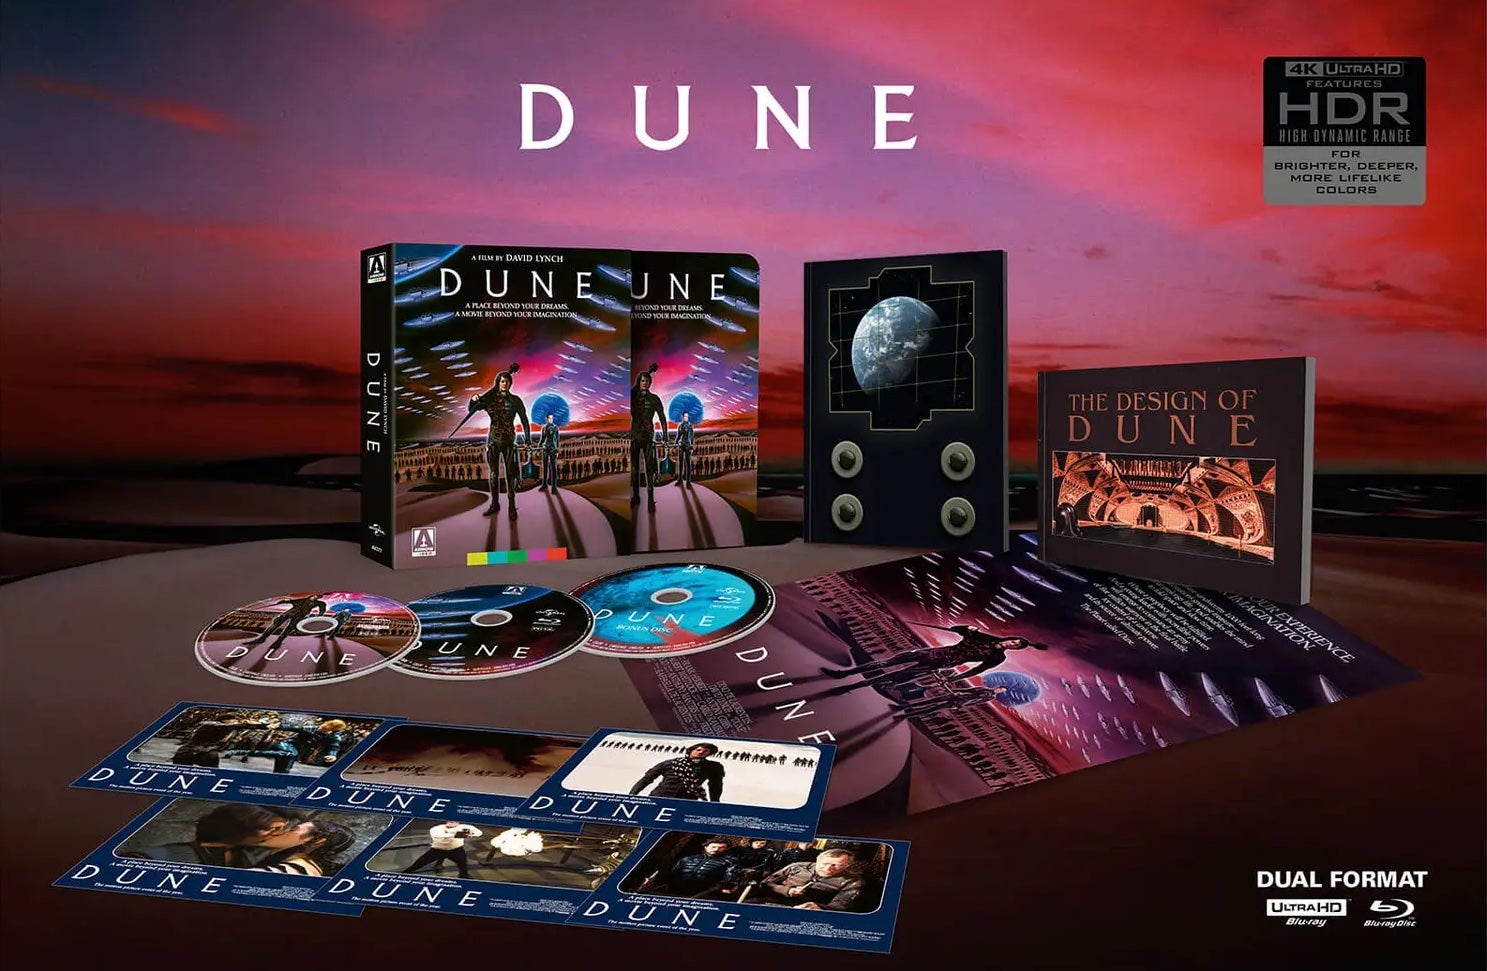 The contents of the Dune Limited Edition Deluxe 4K Ultra HD Steelbook set, not to be confused with the Dune Limited Edition 4K Ultra HD Steelbook set. (Image: Universal/Arrow Video)